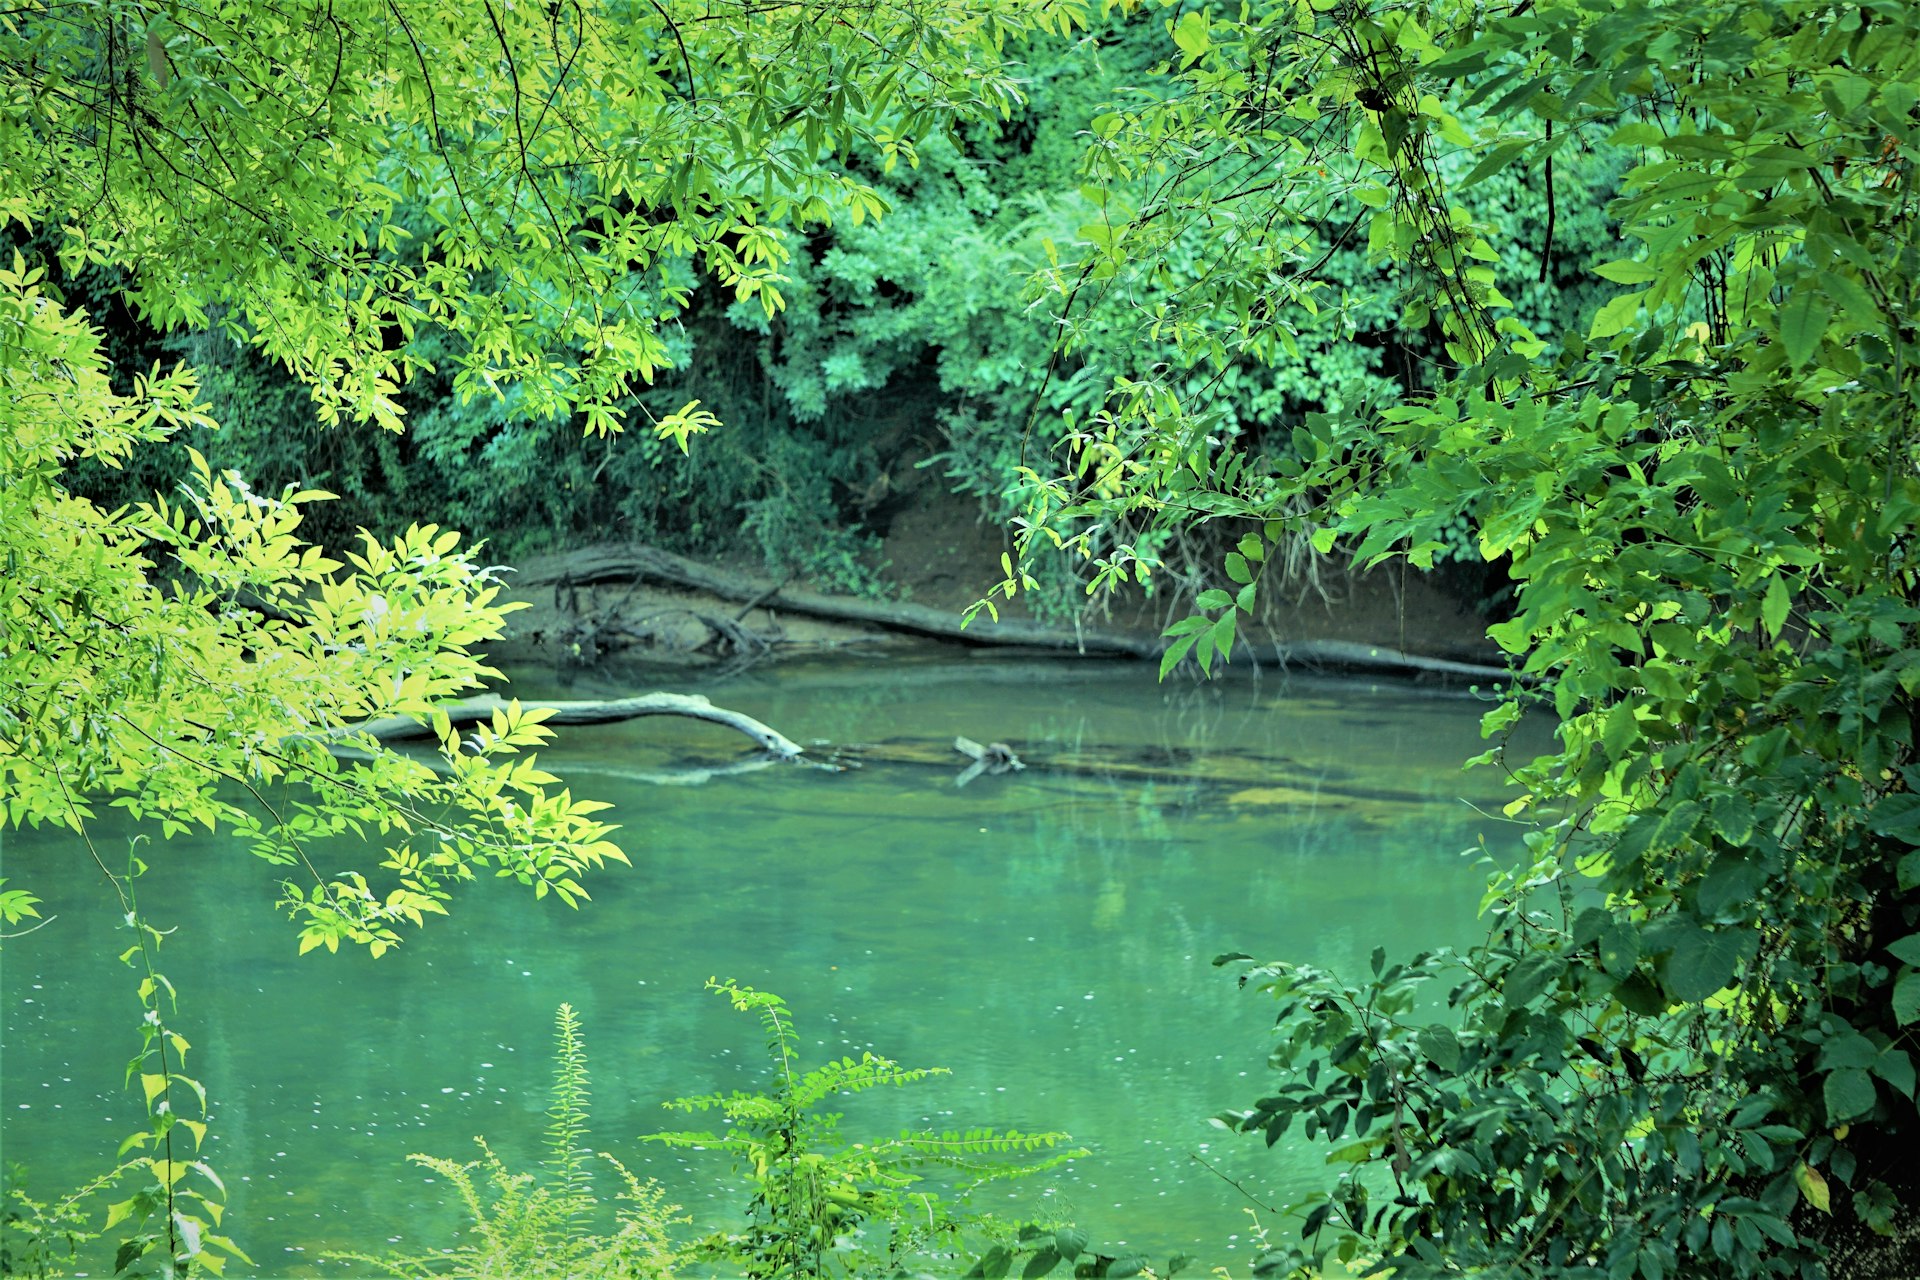 The brilliant turquoise waters of the Oconee River in Milledgeville, Georgia can be glimpsed through equally brilliant foliage in shades of jade and electric green near Milledgeville Georgia